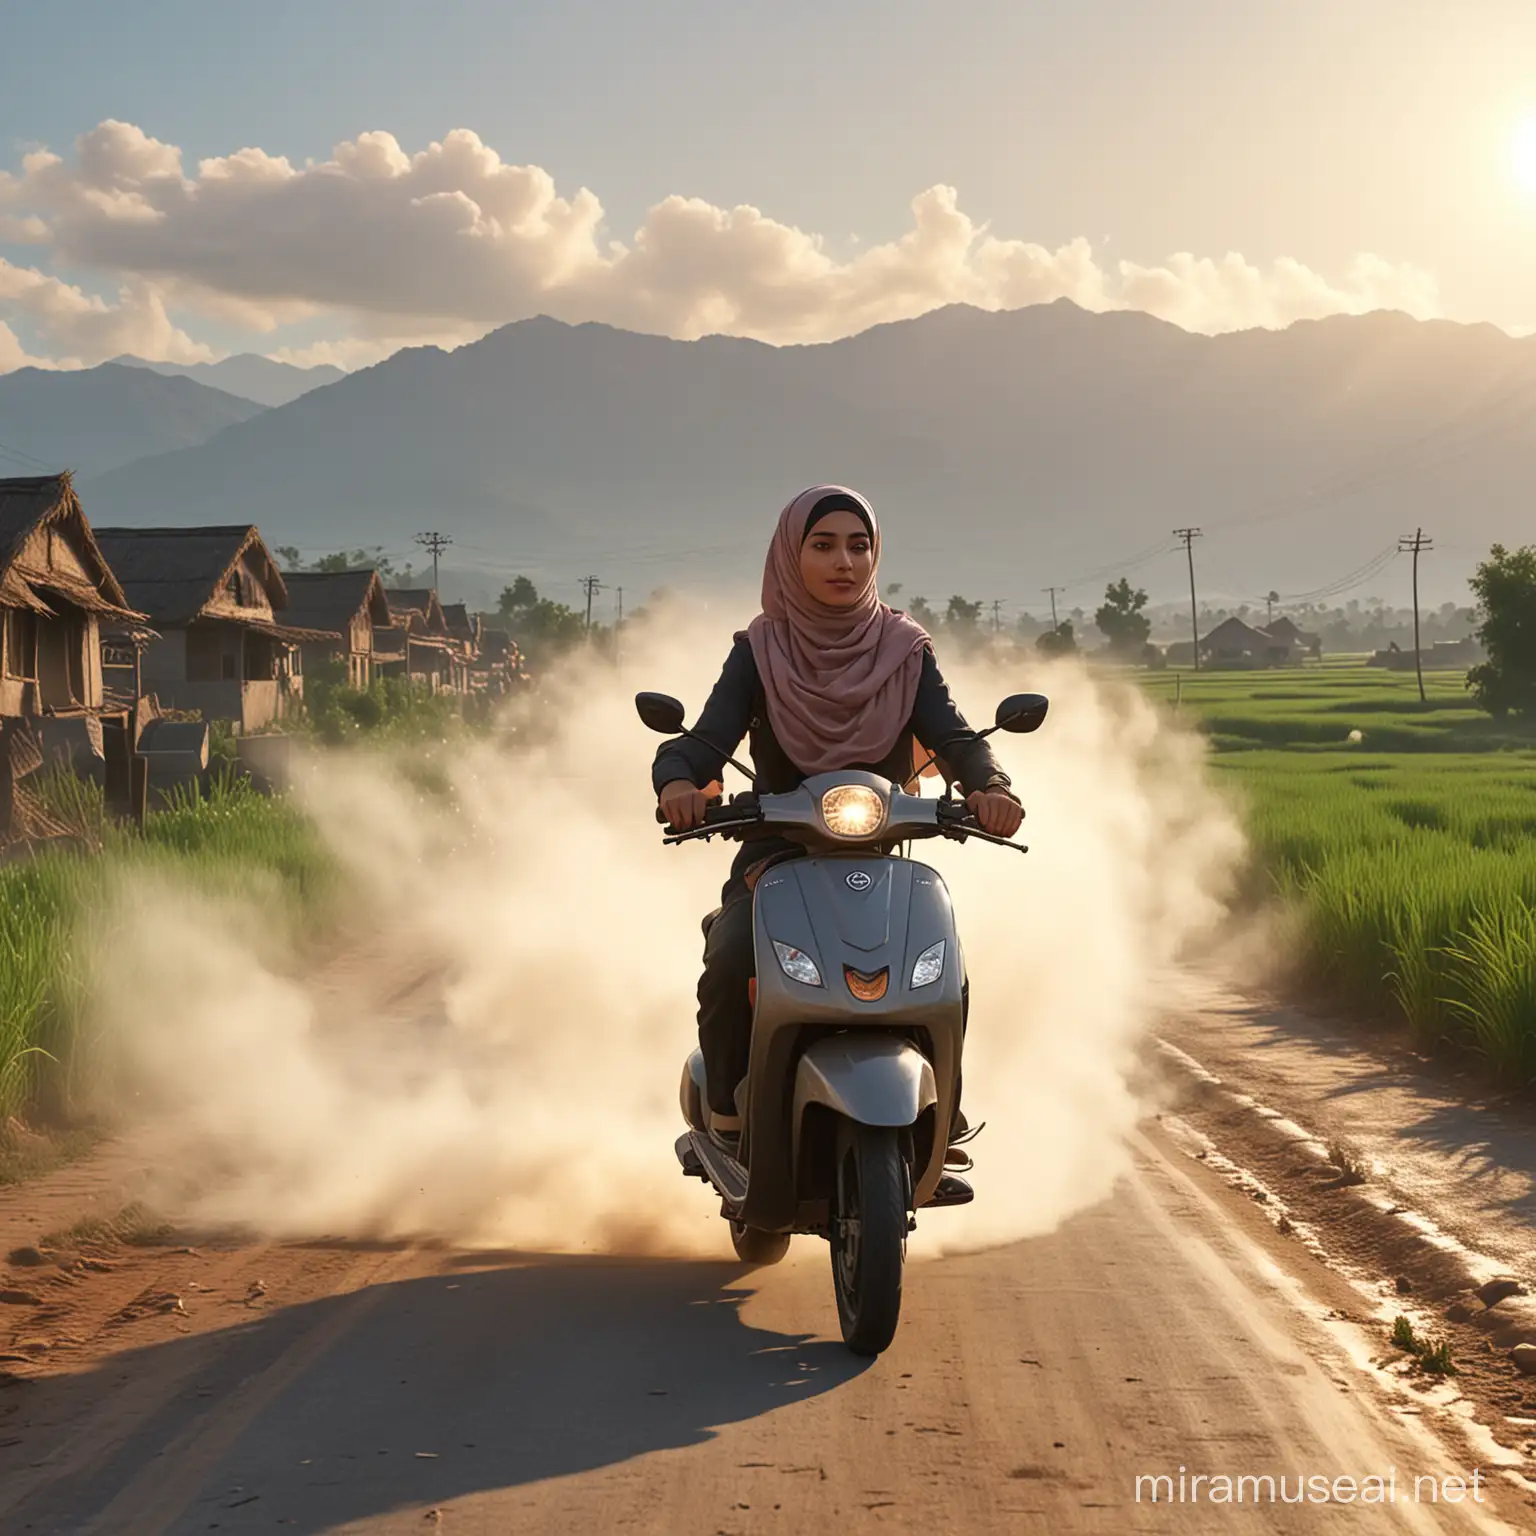 Muslim Woman Riding Scooter Through Countryside Mist